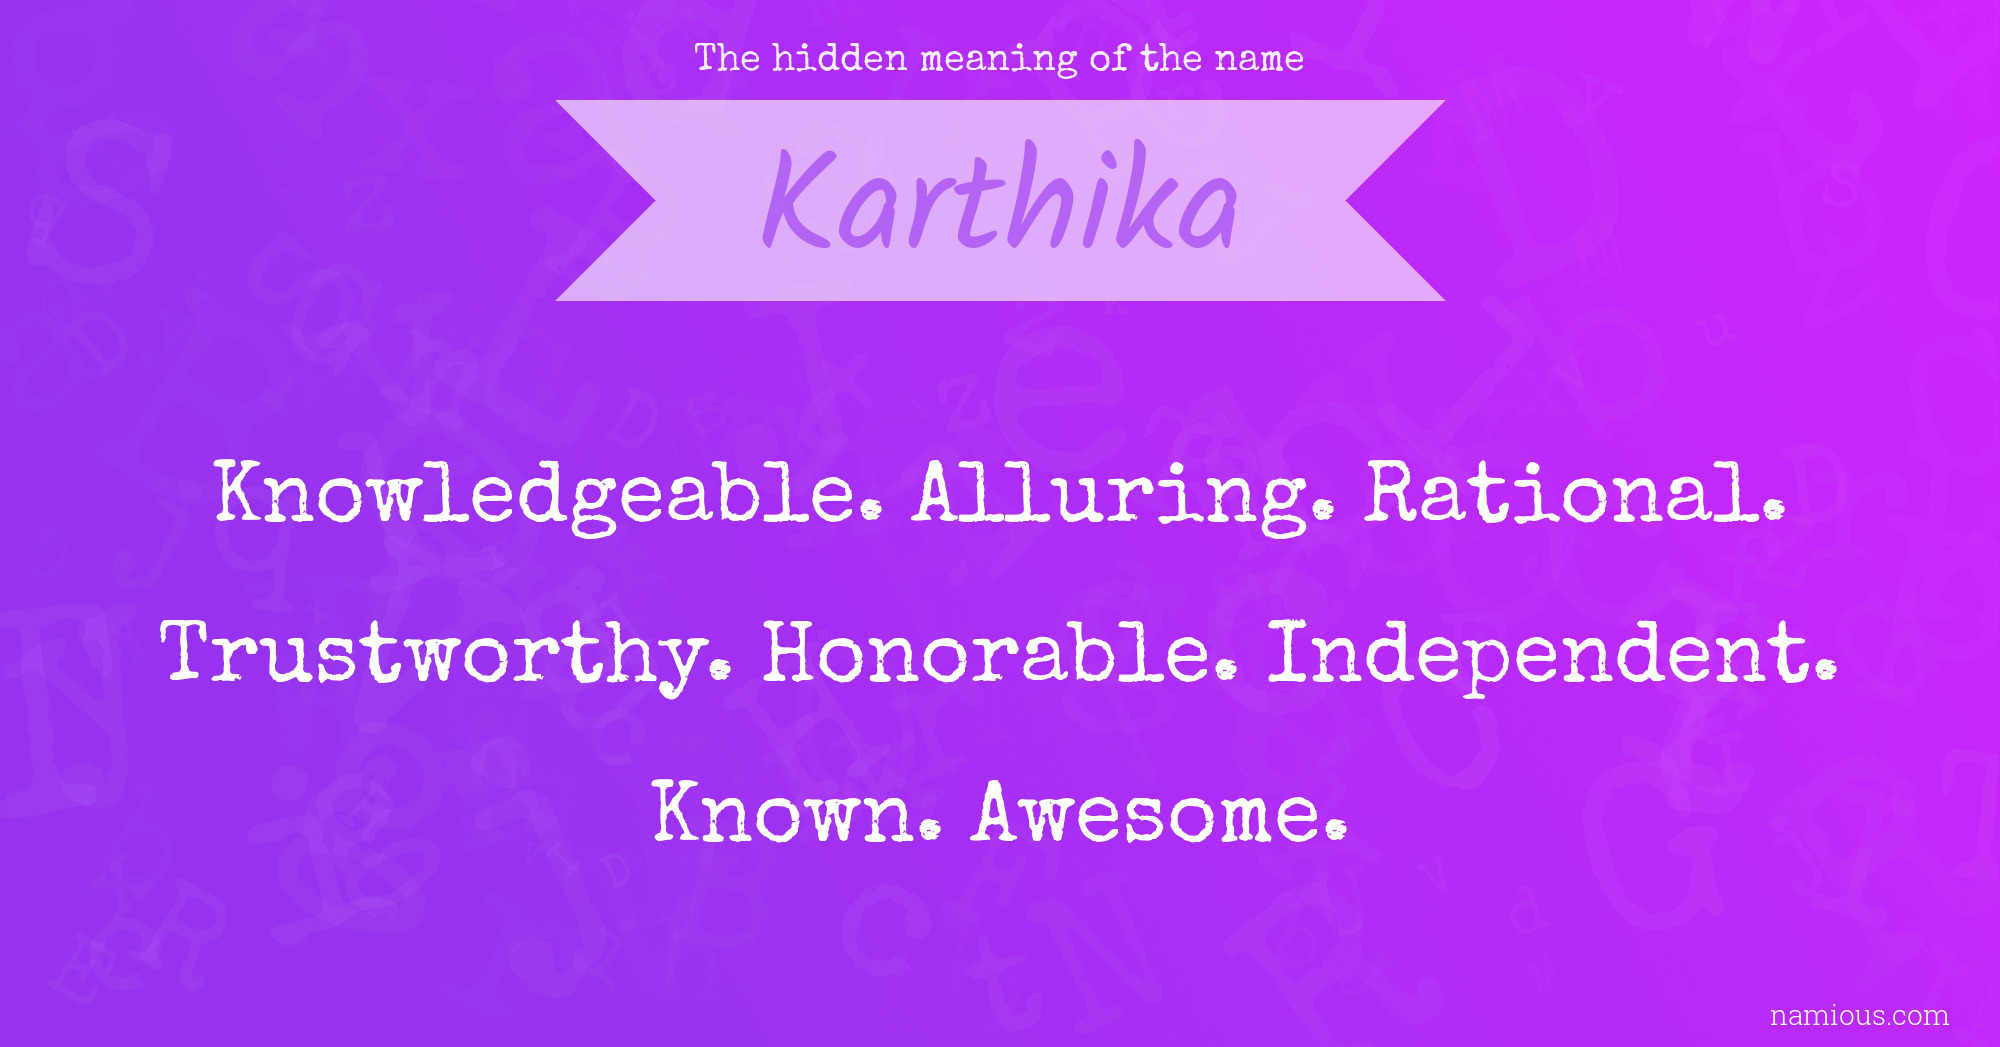 The hidden meaning of the name Karthika